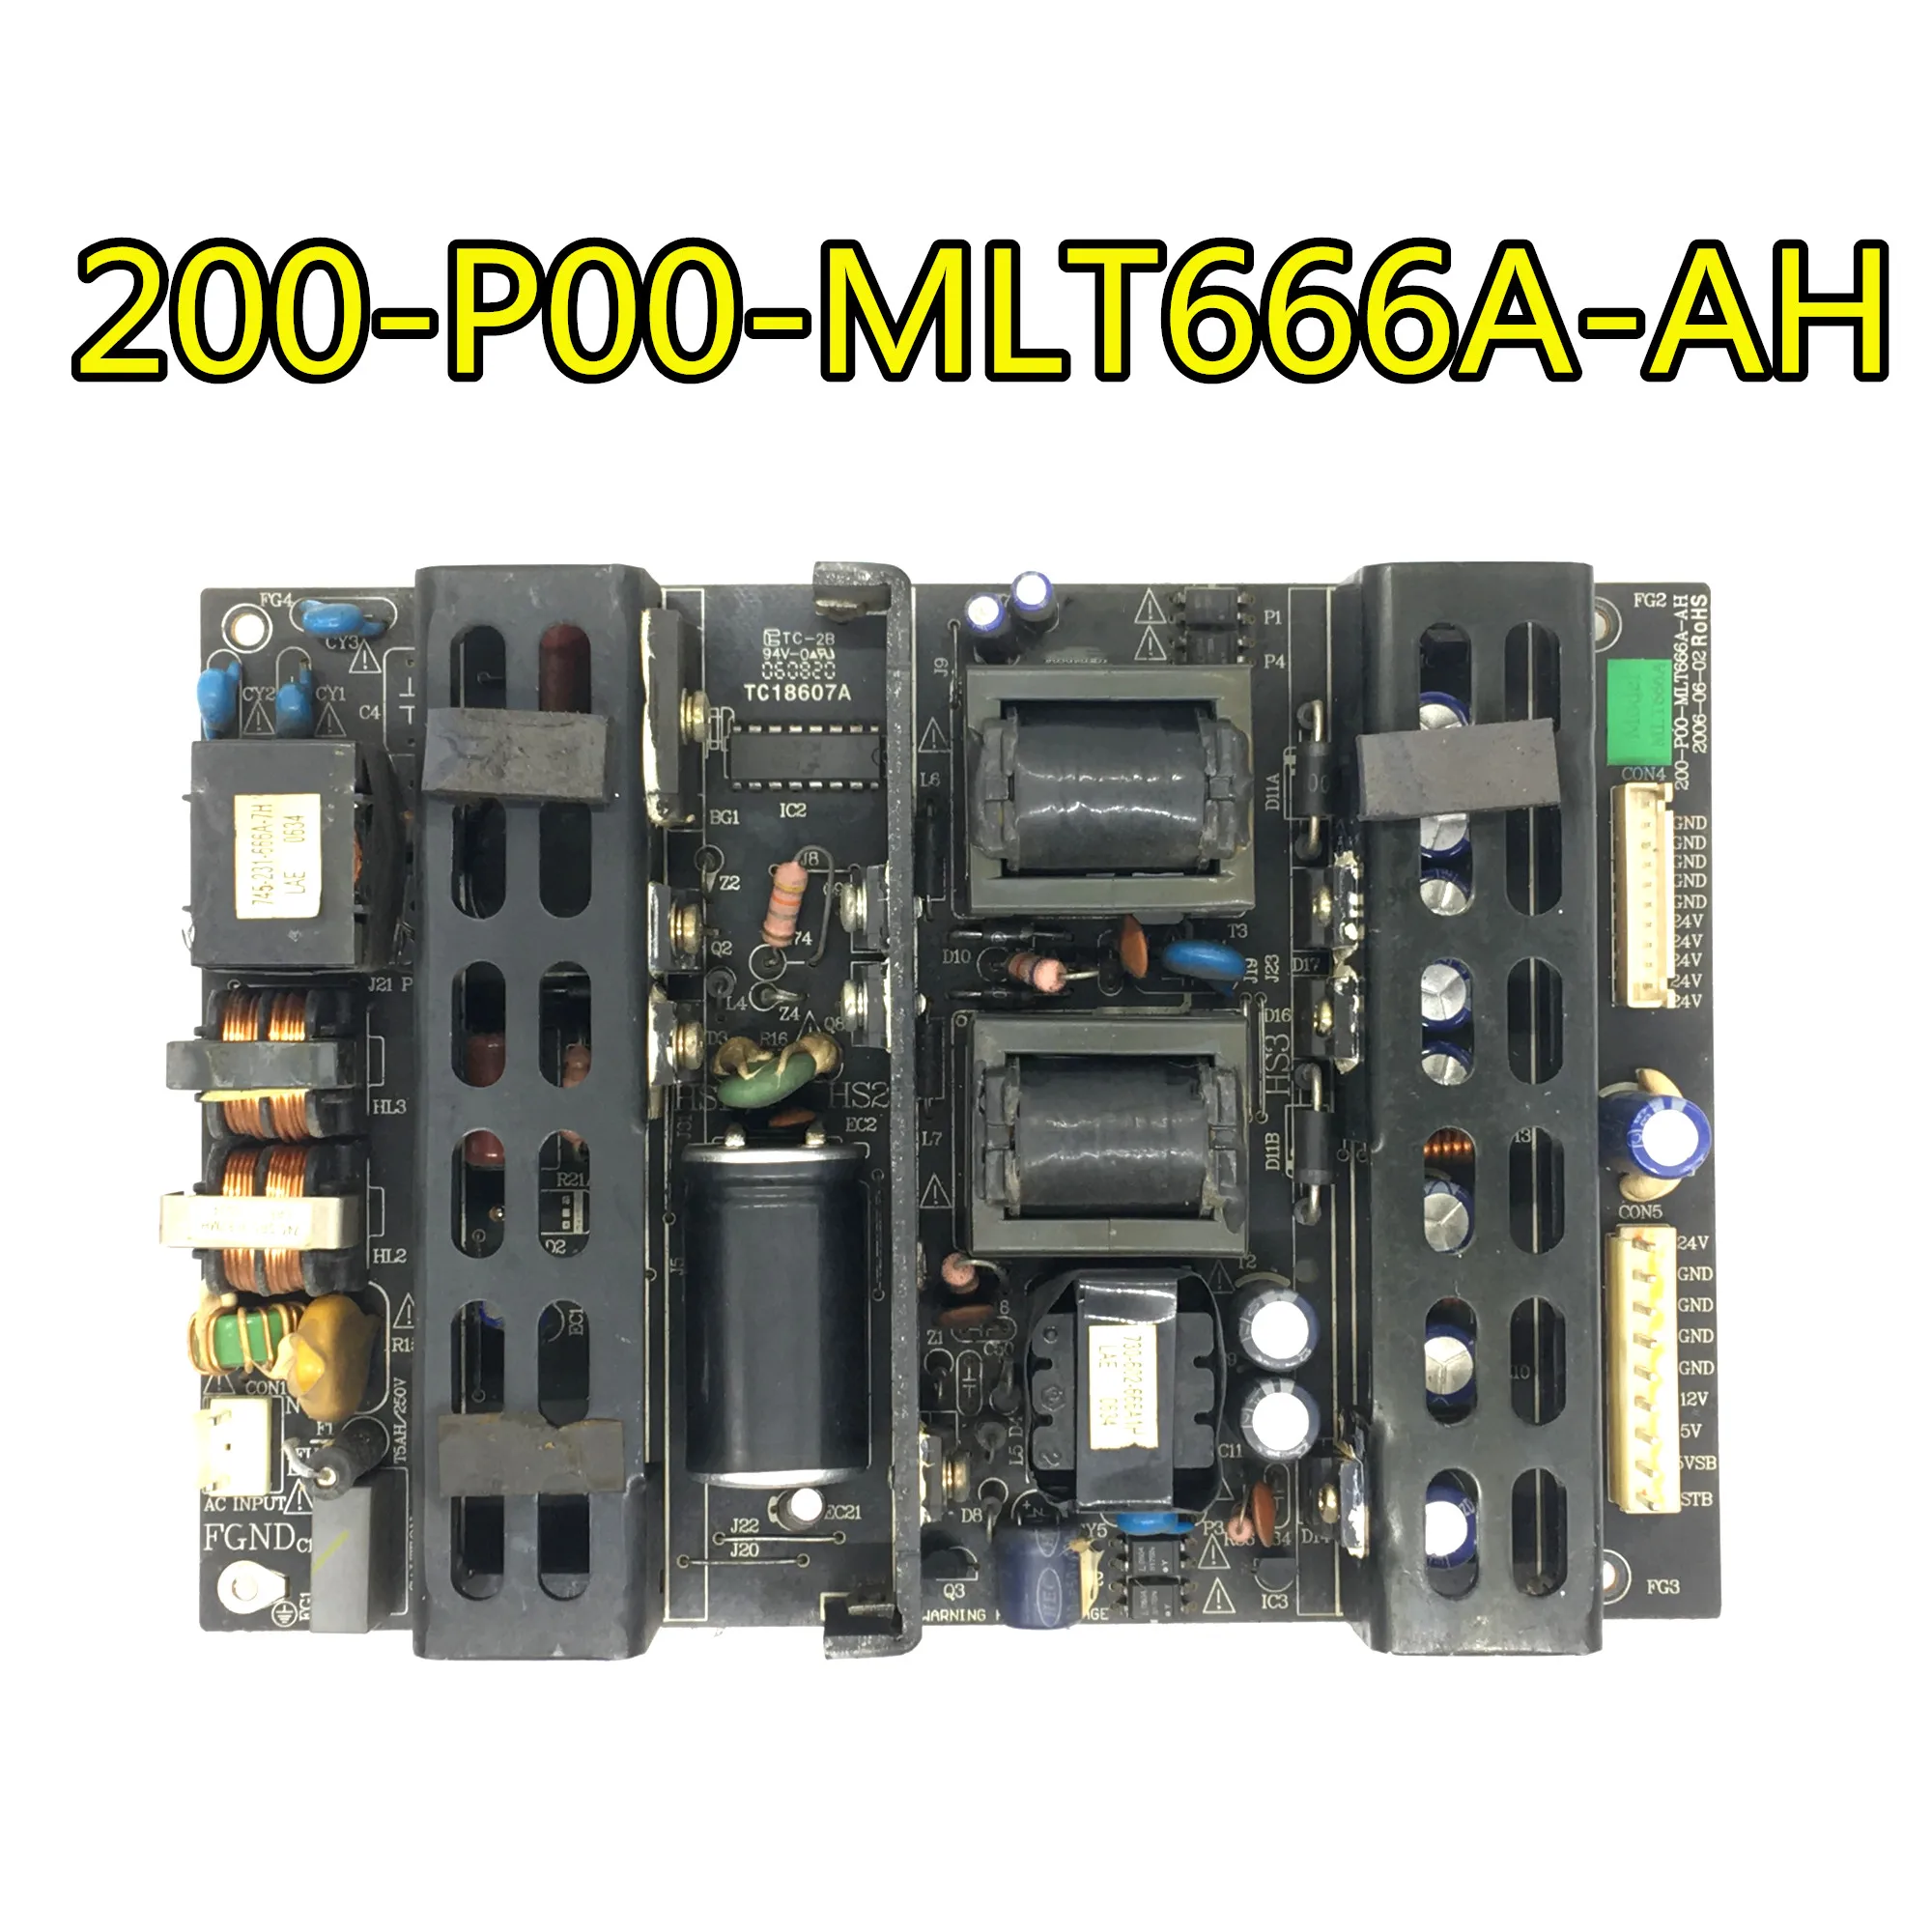 

100% test for LC32E51 TC18607A 200-P00-MLT666A-AH power board